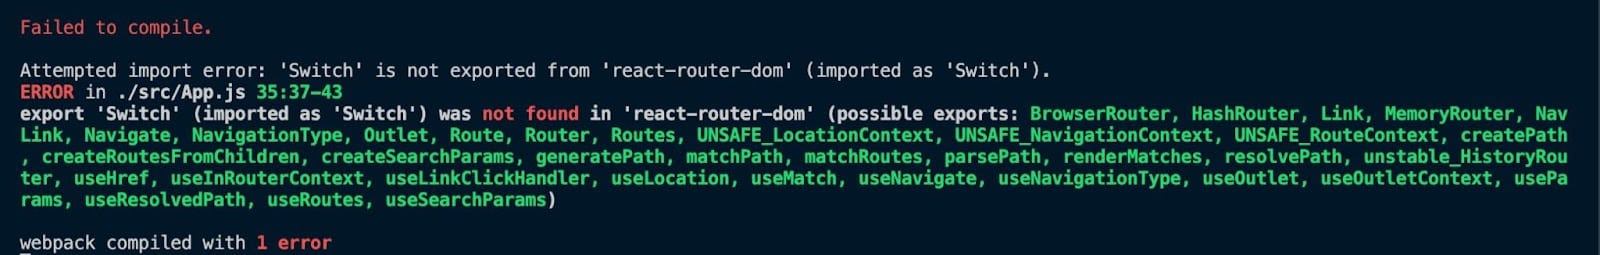 「'Switch' is not exported from 'react-router-dom' 」というエラー